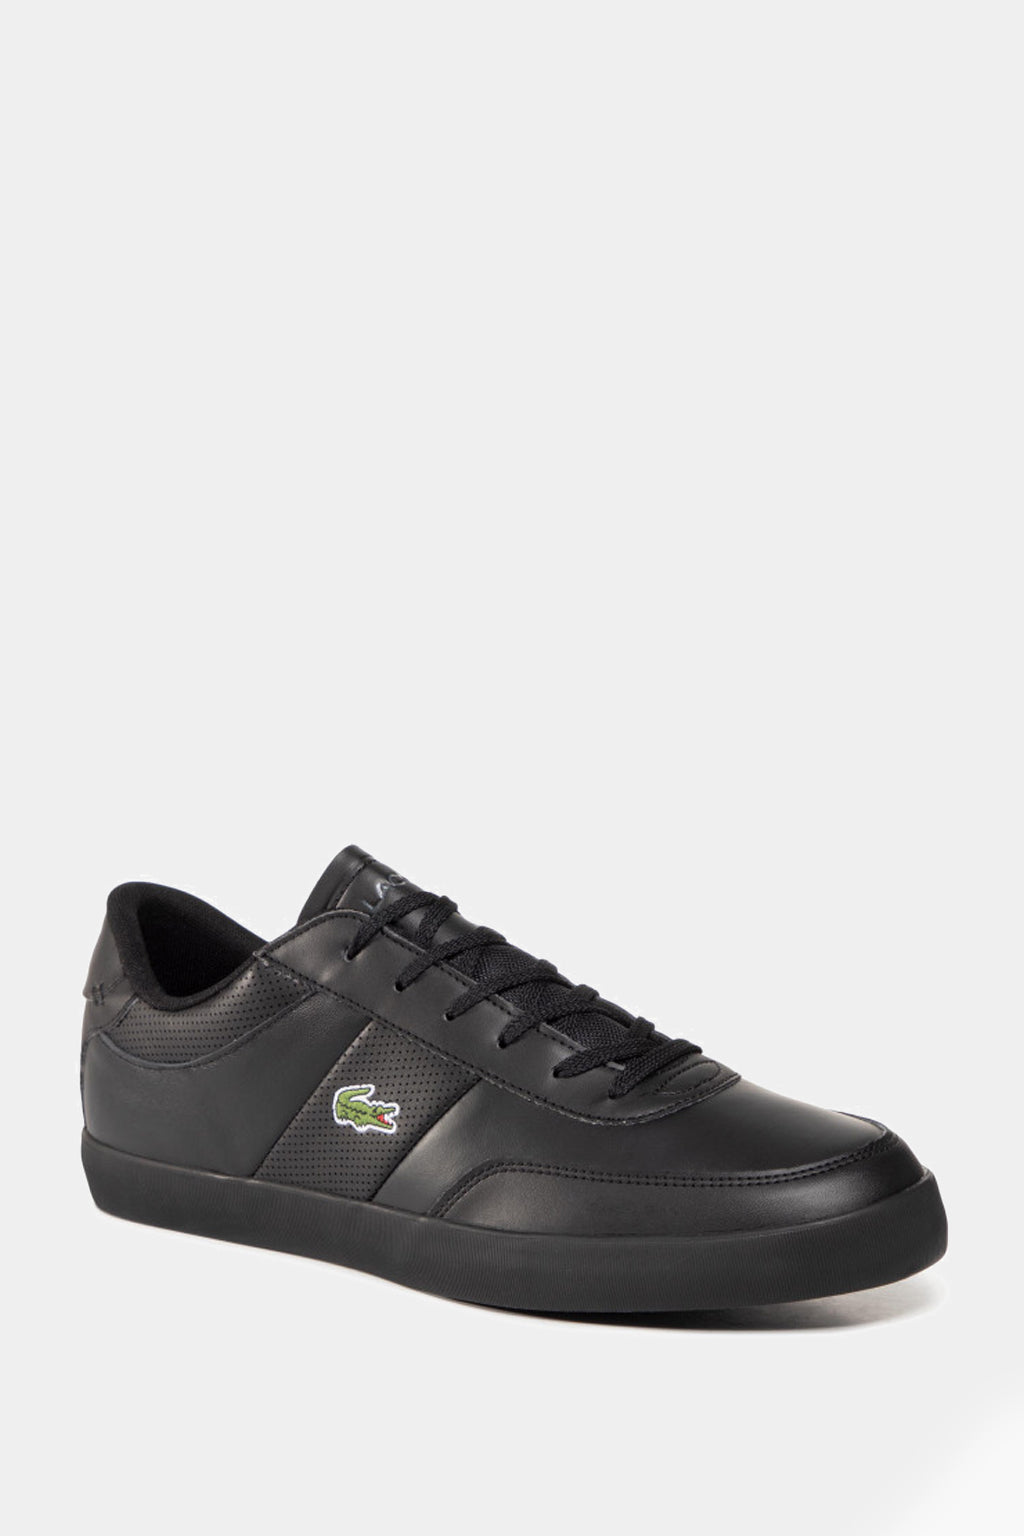 Lacoste - Court Master Perf Stripe Sneakers in Black